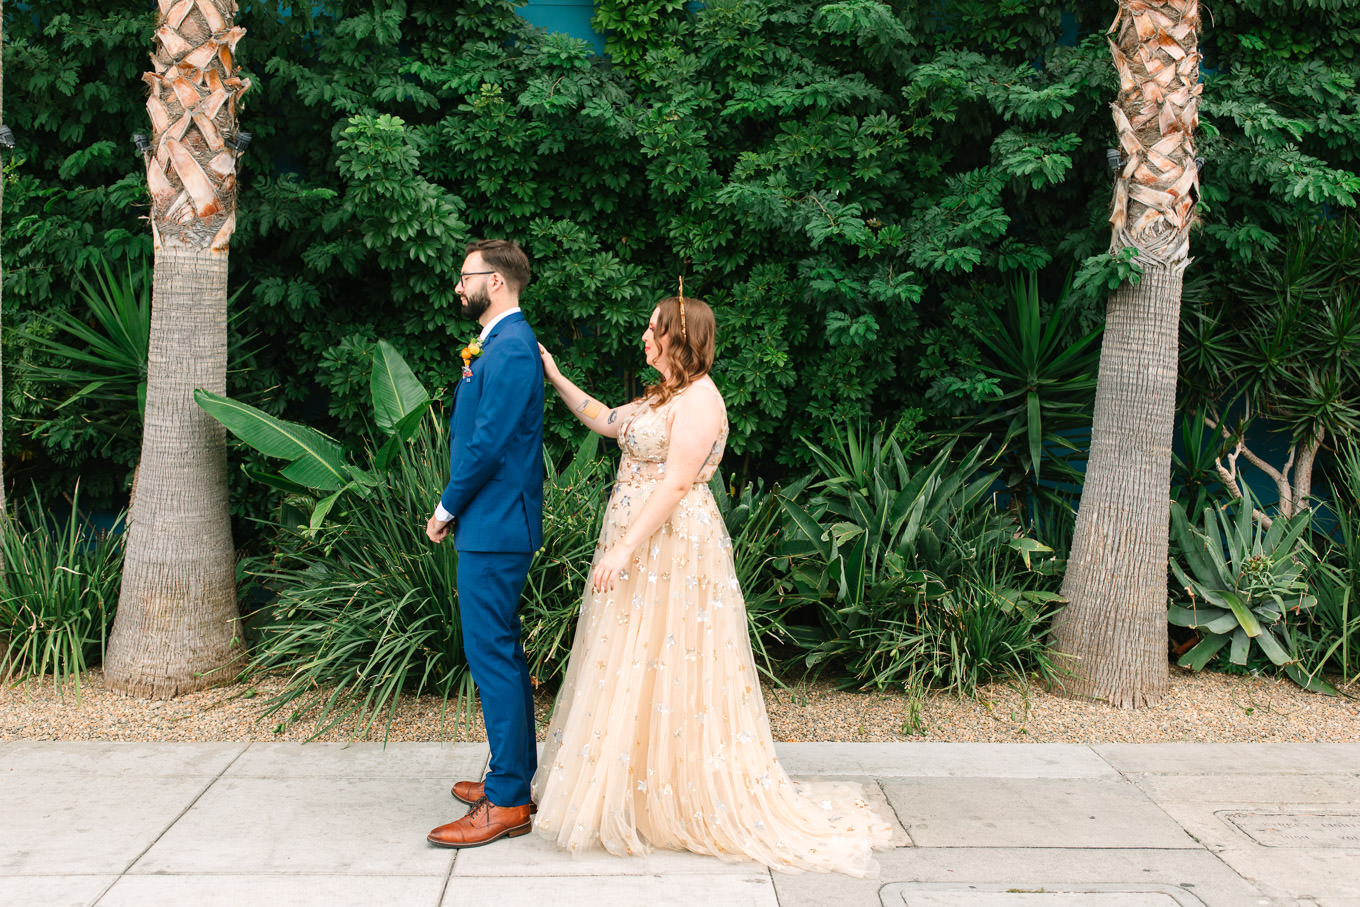 First look between bride and groom | Colorful Downtown Los Angeles Valentine Wedding | Los Angeles wedding photographer | #losangeleswedding #colorfulwedding #DTLA #valentinedtla   Source: Mary Costa Photography | Los Angeles